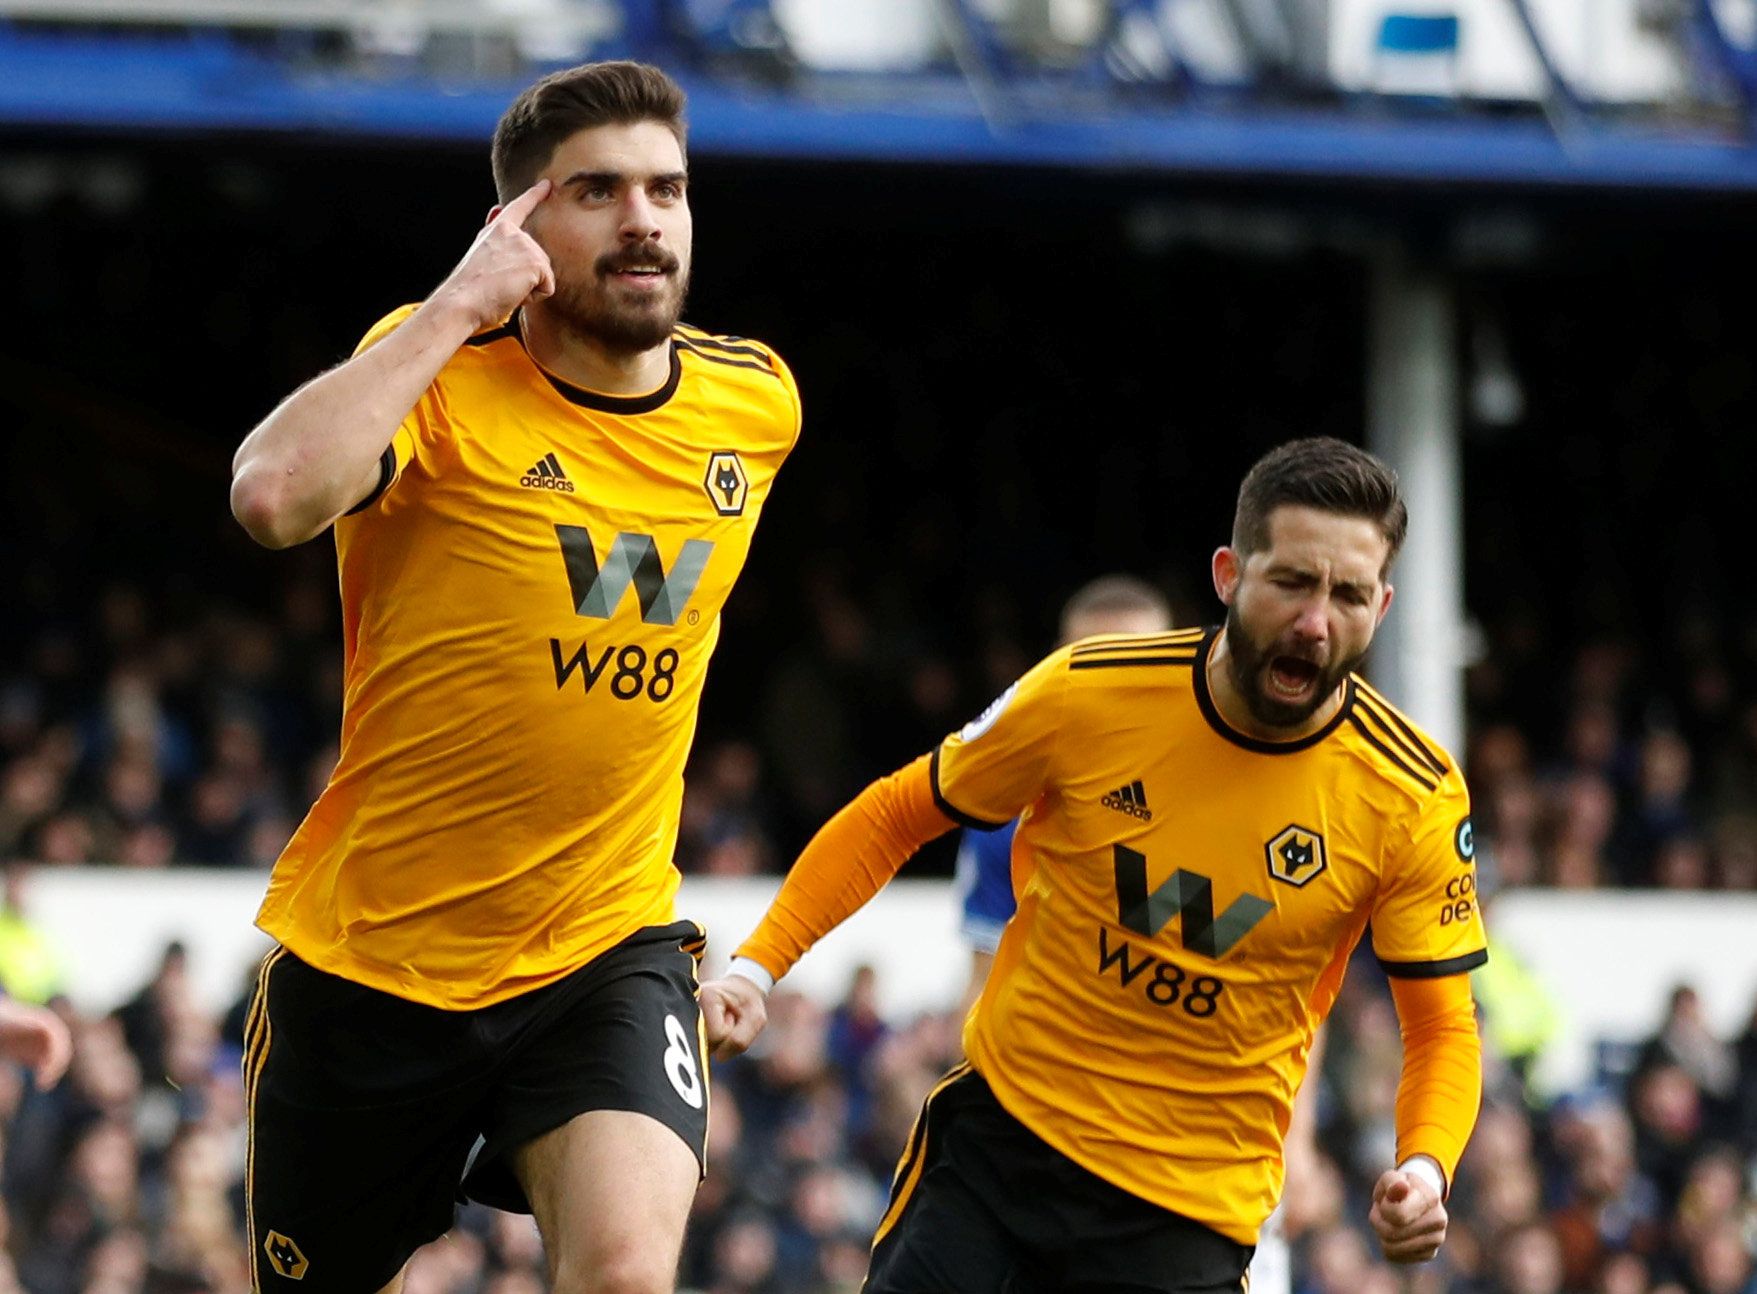 Soccer Football - Premier League - Everton v Wolverhampton Wanderers - Goodison Park, Liverpool, Britain - February 2, 2019  Wolverhampton Wanderers' Ruben Neves celebrates scoring their first goal with Joao Moutinho   Action Images via Reuters/Carl Recine  EDITORIAL USE ONLY. No use with unauthorized audio, video, data, fixture lists, club/league logos or 